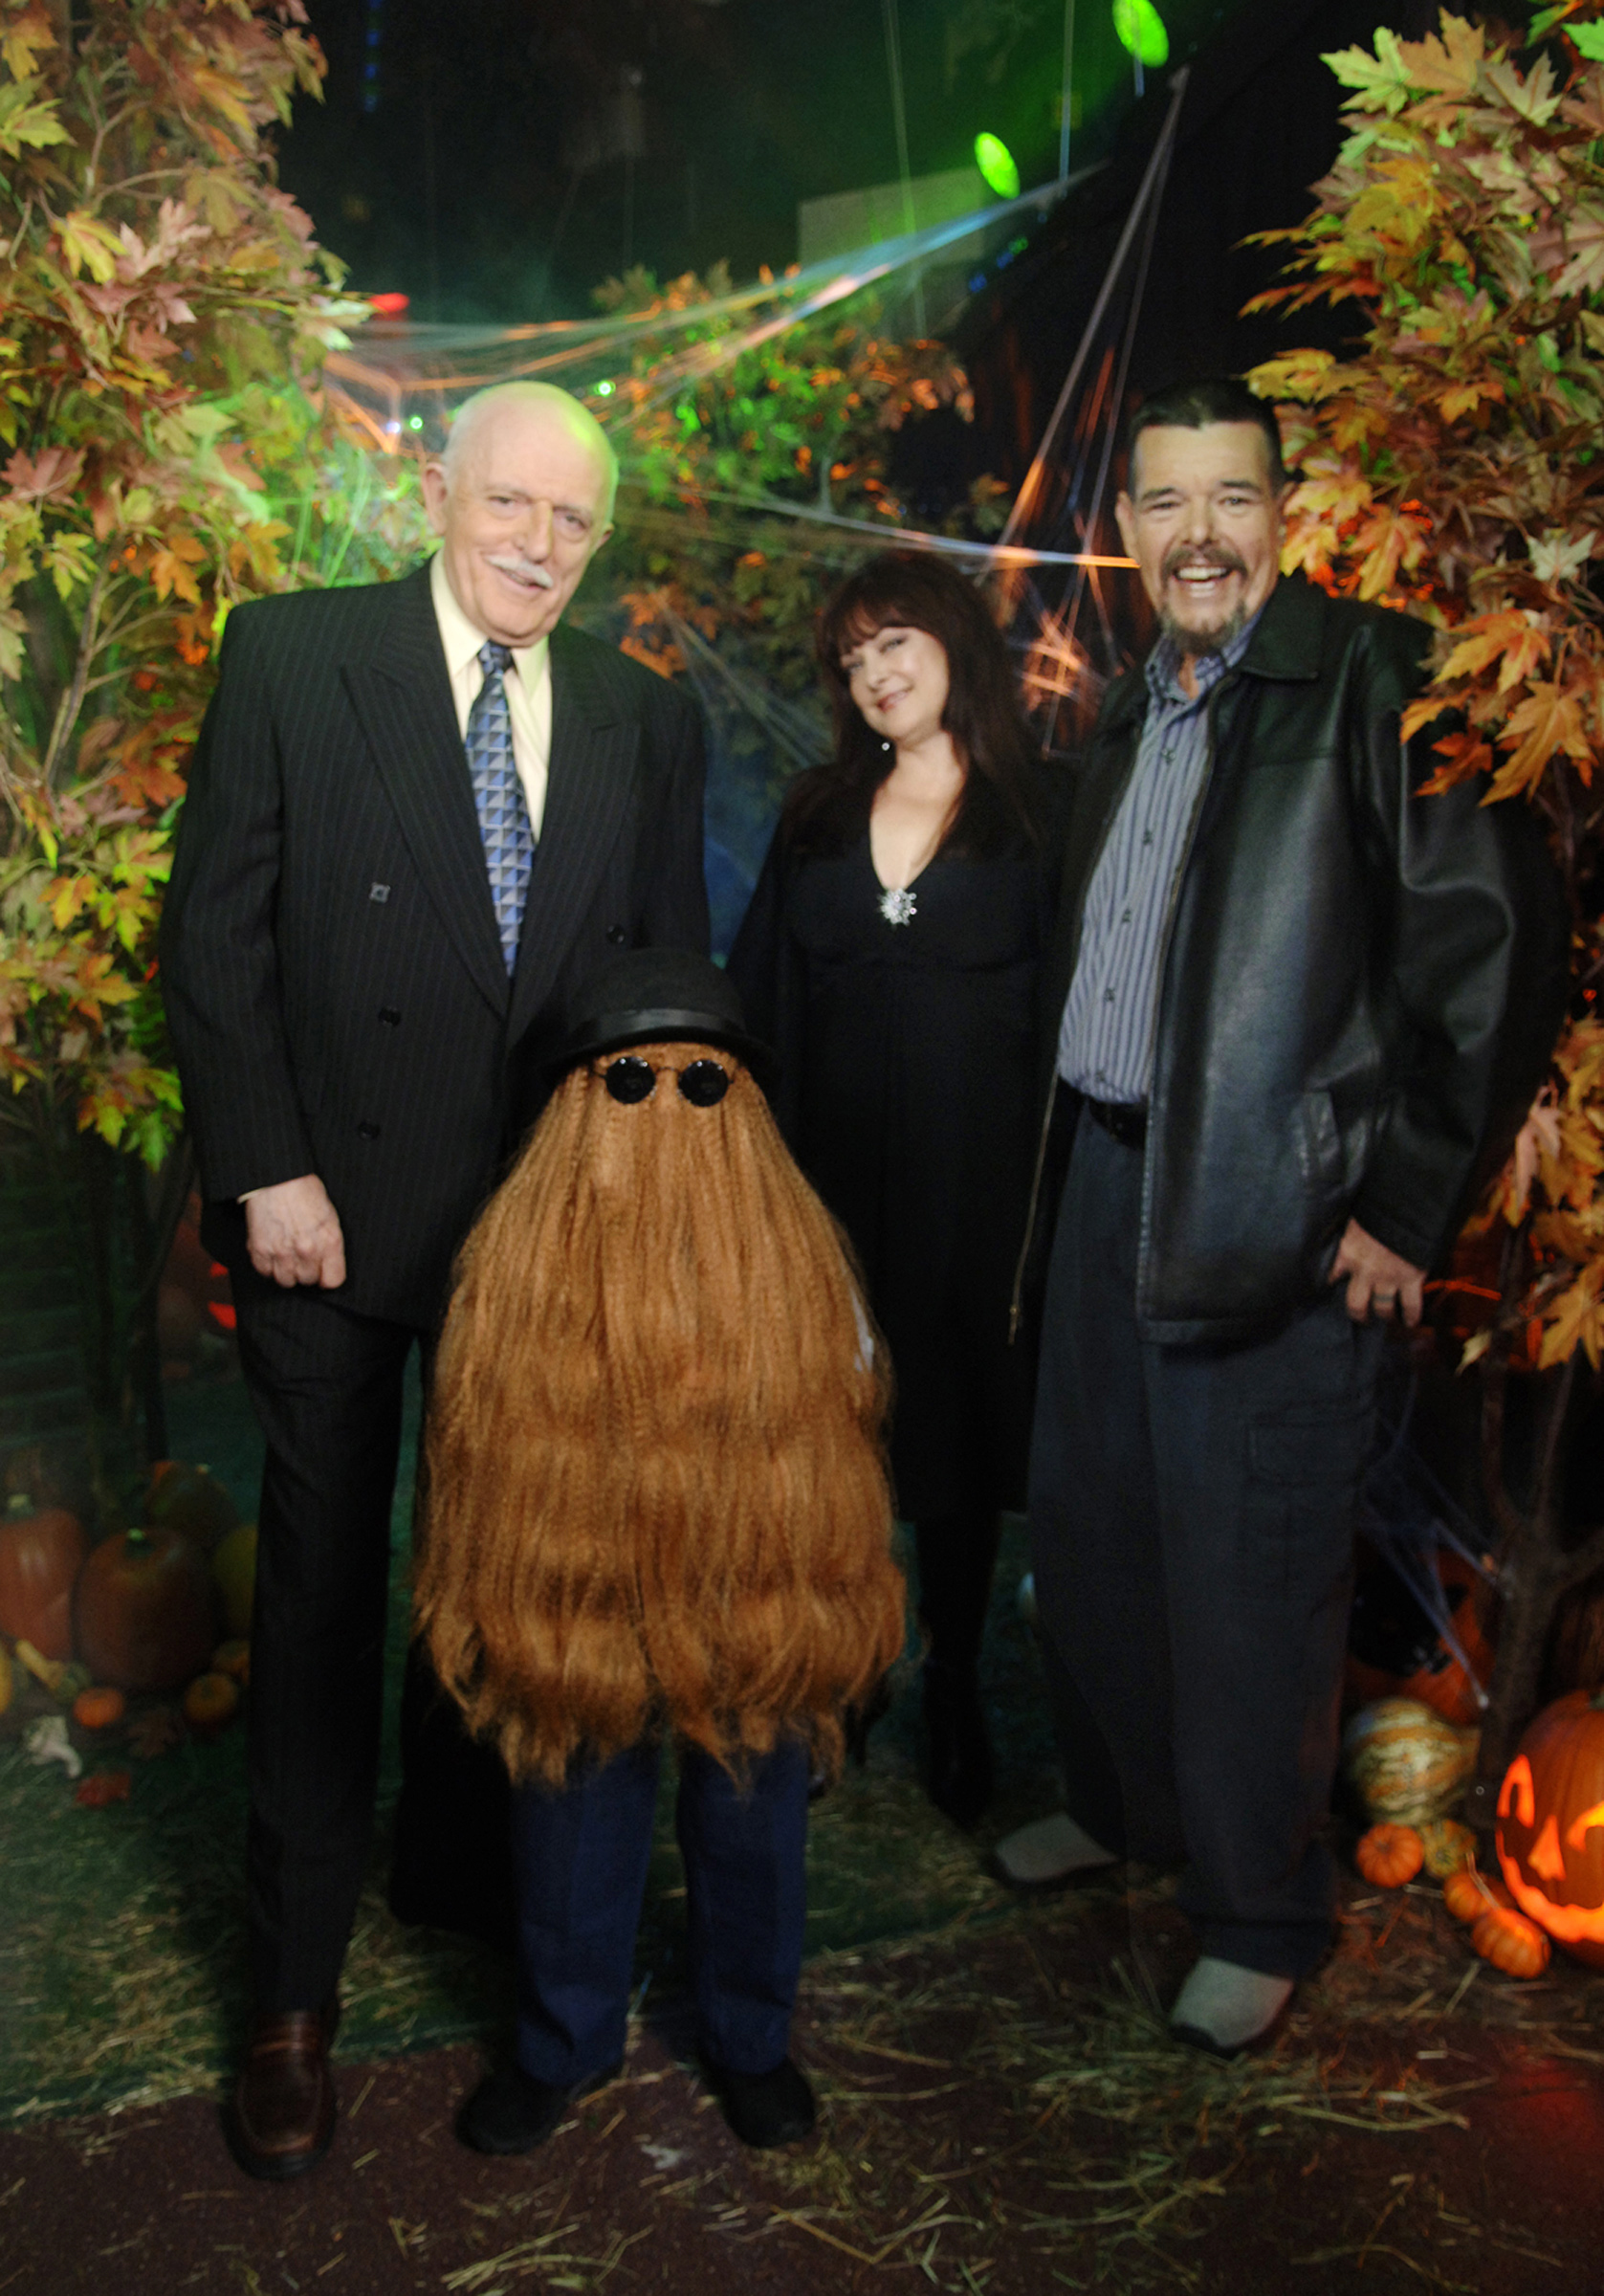 This Oct. 31, 2006, photo provided by ABC, shows some of the original cast of the TV show <i>The Addams Family</i>. From left: John Astin (Gomez Addams), Felix Silla (Cousin Itt), Lisa Loring (Wednesday Addams) and Ken Weatherwax (Pugsley Addams) reunited at a special Halloween edition of ABC's <i>Good Morning America</i> outside their Times Square studios in New York City (Ida Mae Astute—AP)